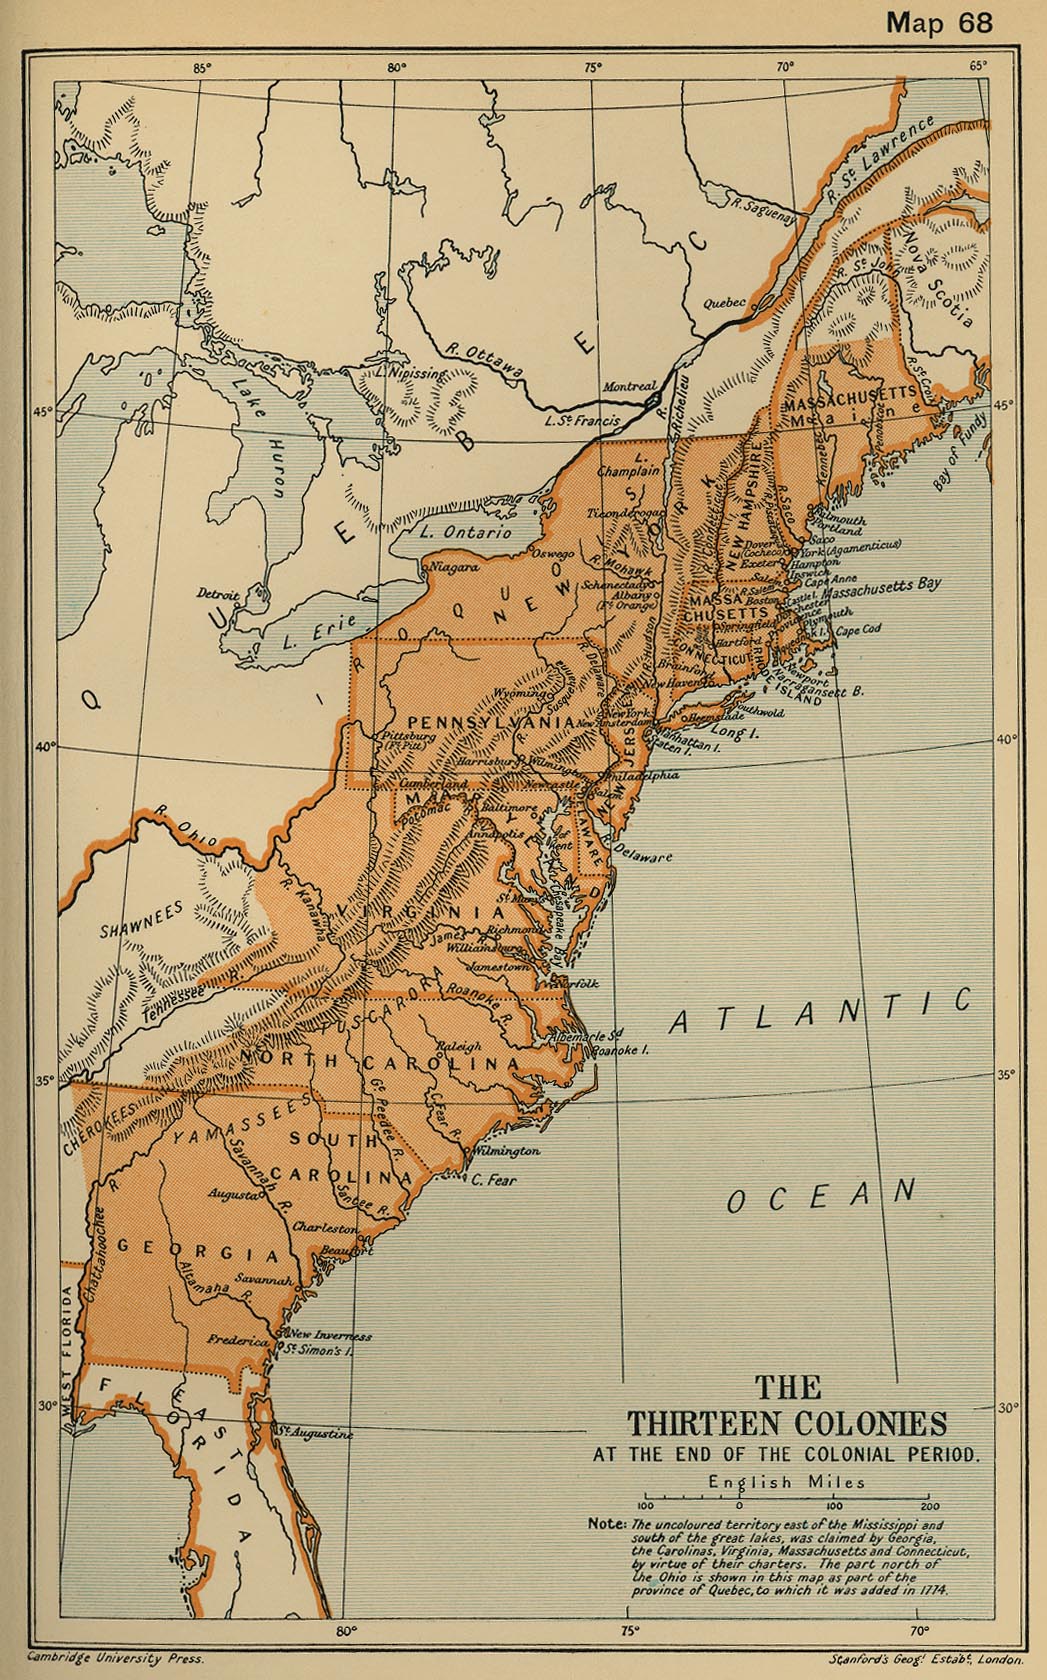 slavery in the southern colonies between 1607 and 1775